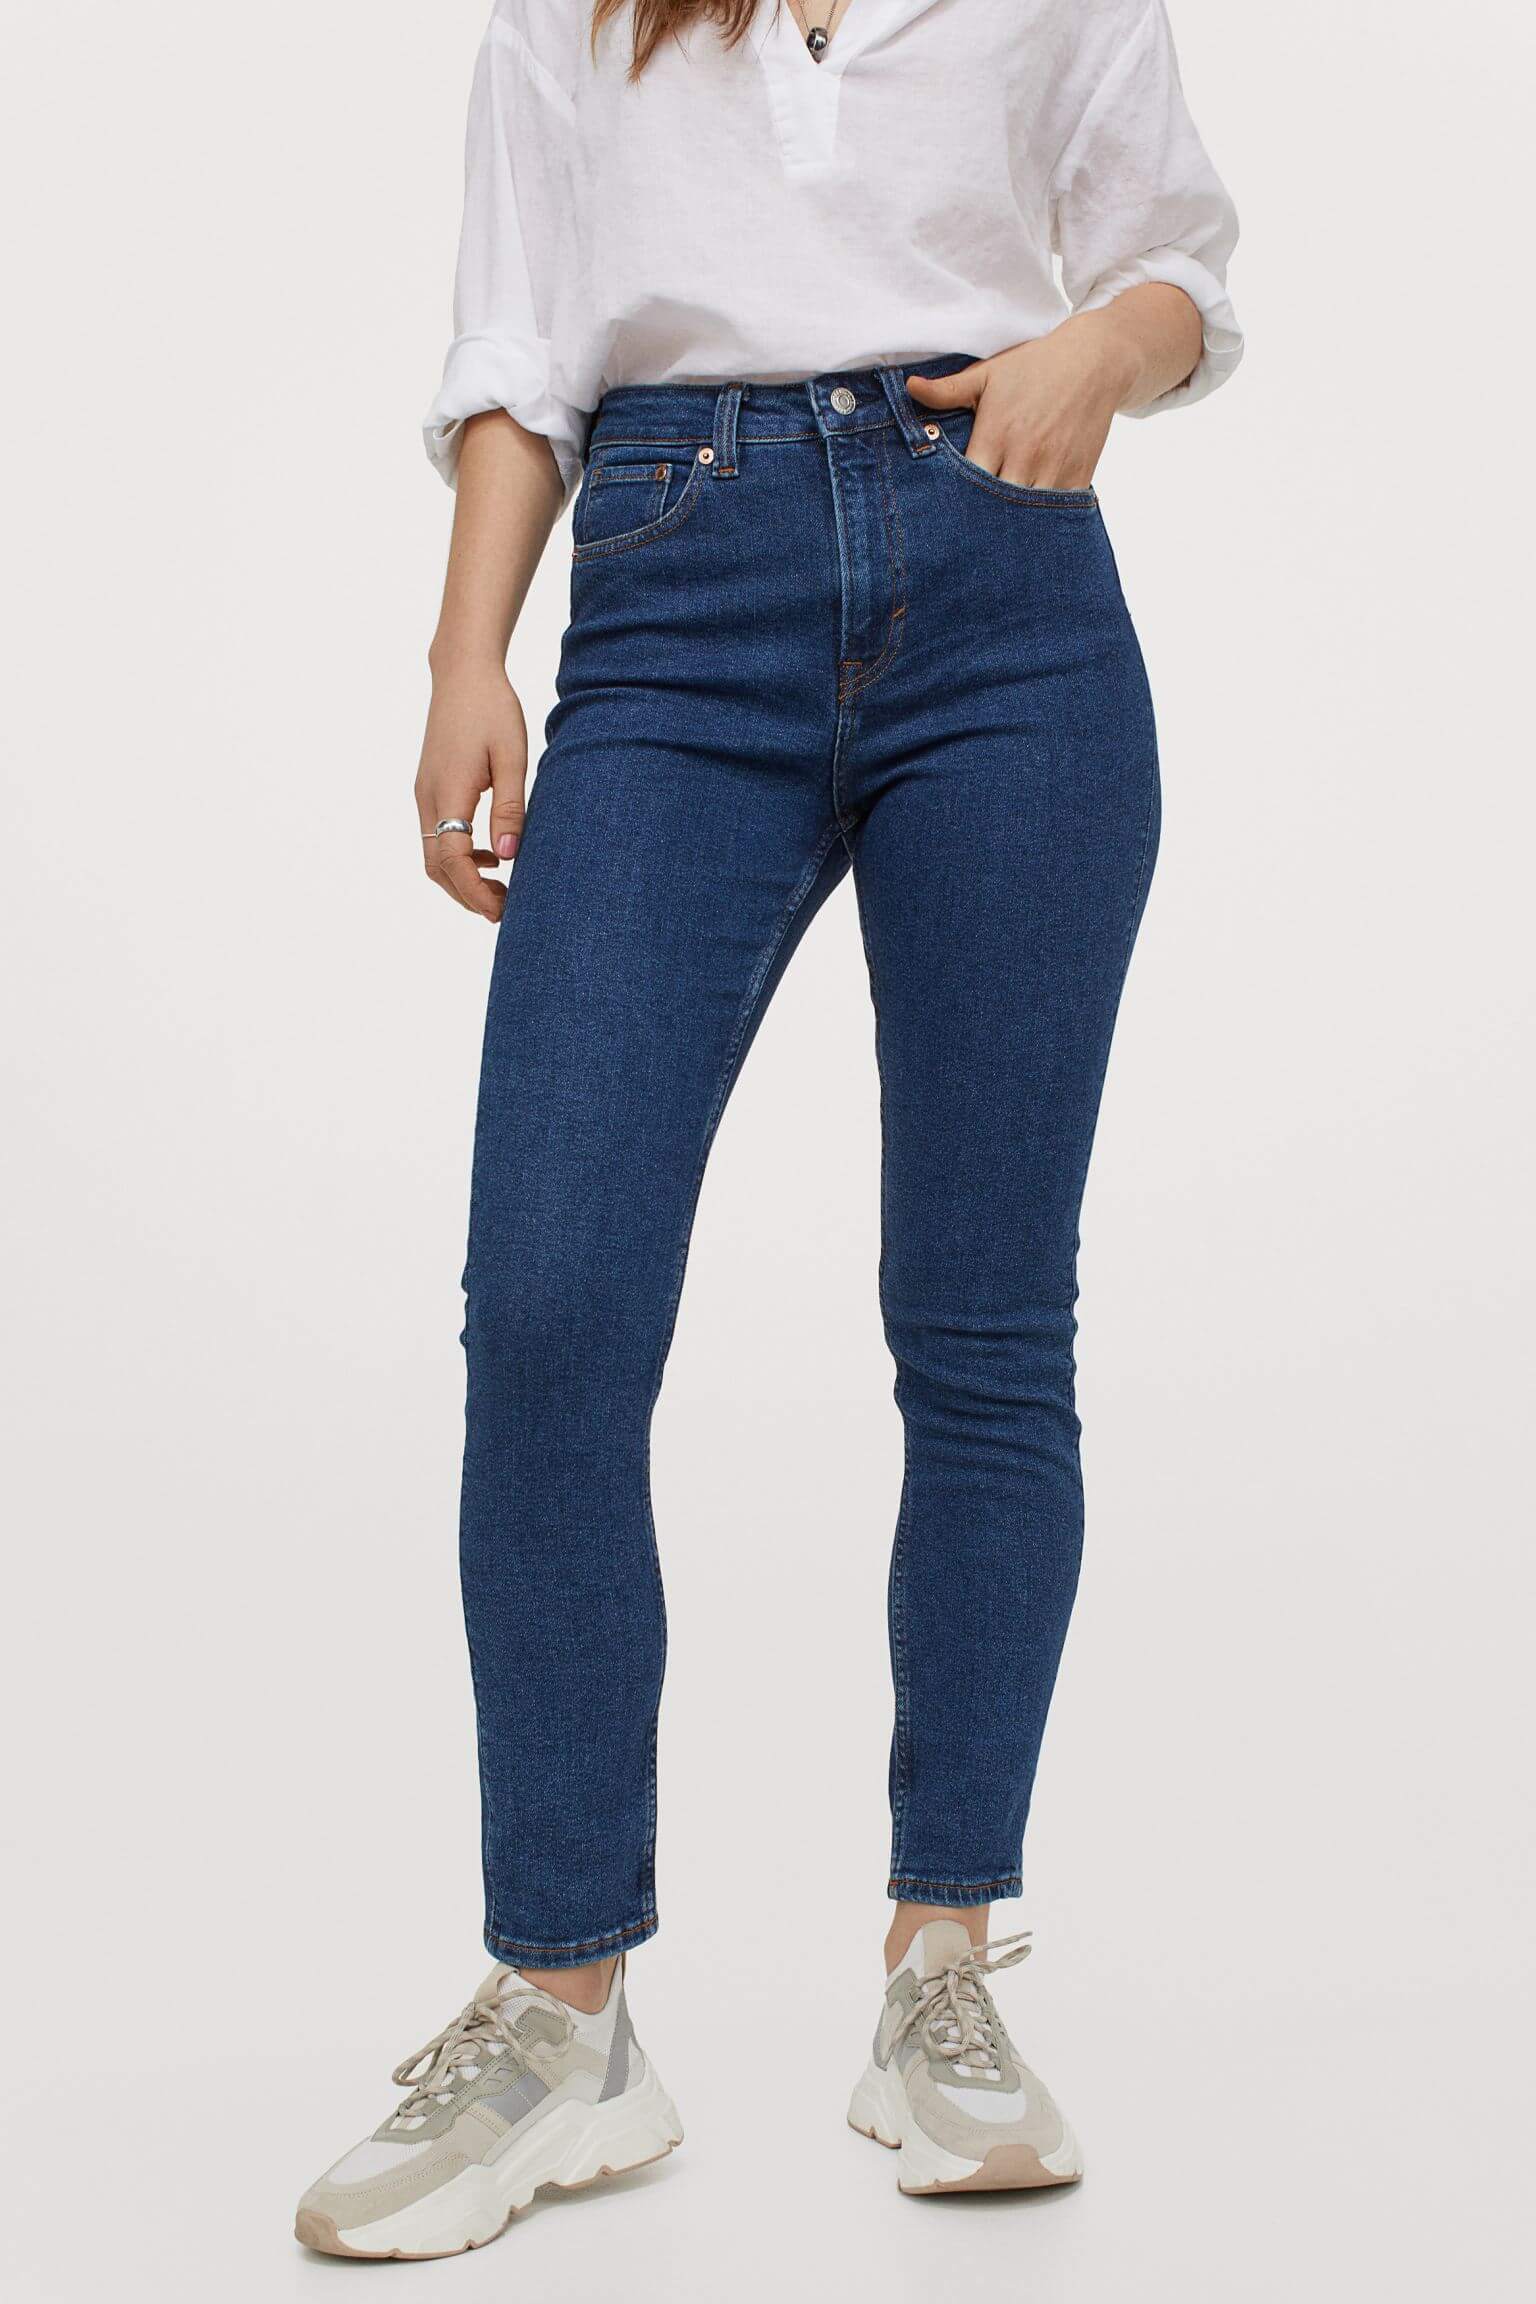 Vintage Skinny High Jeans from H&M